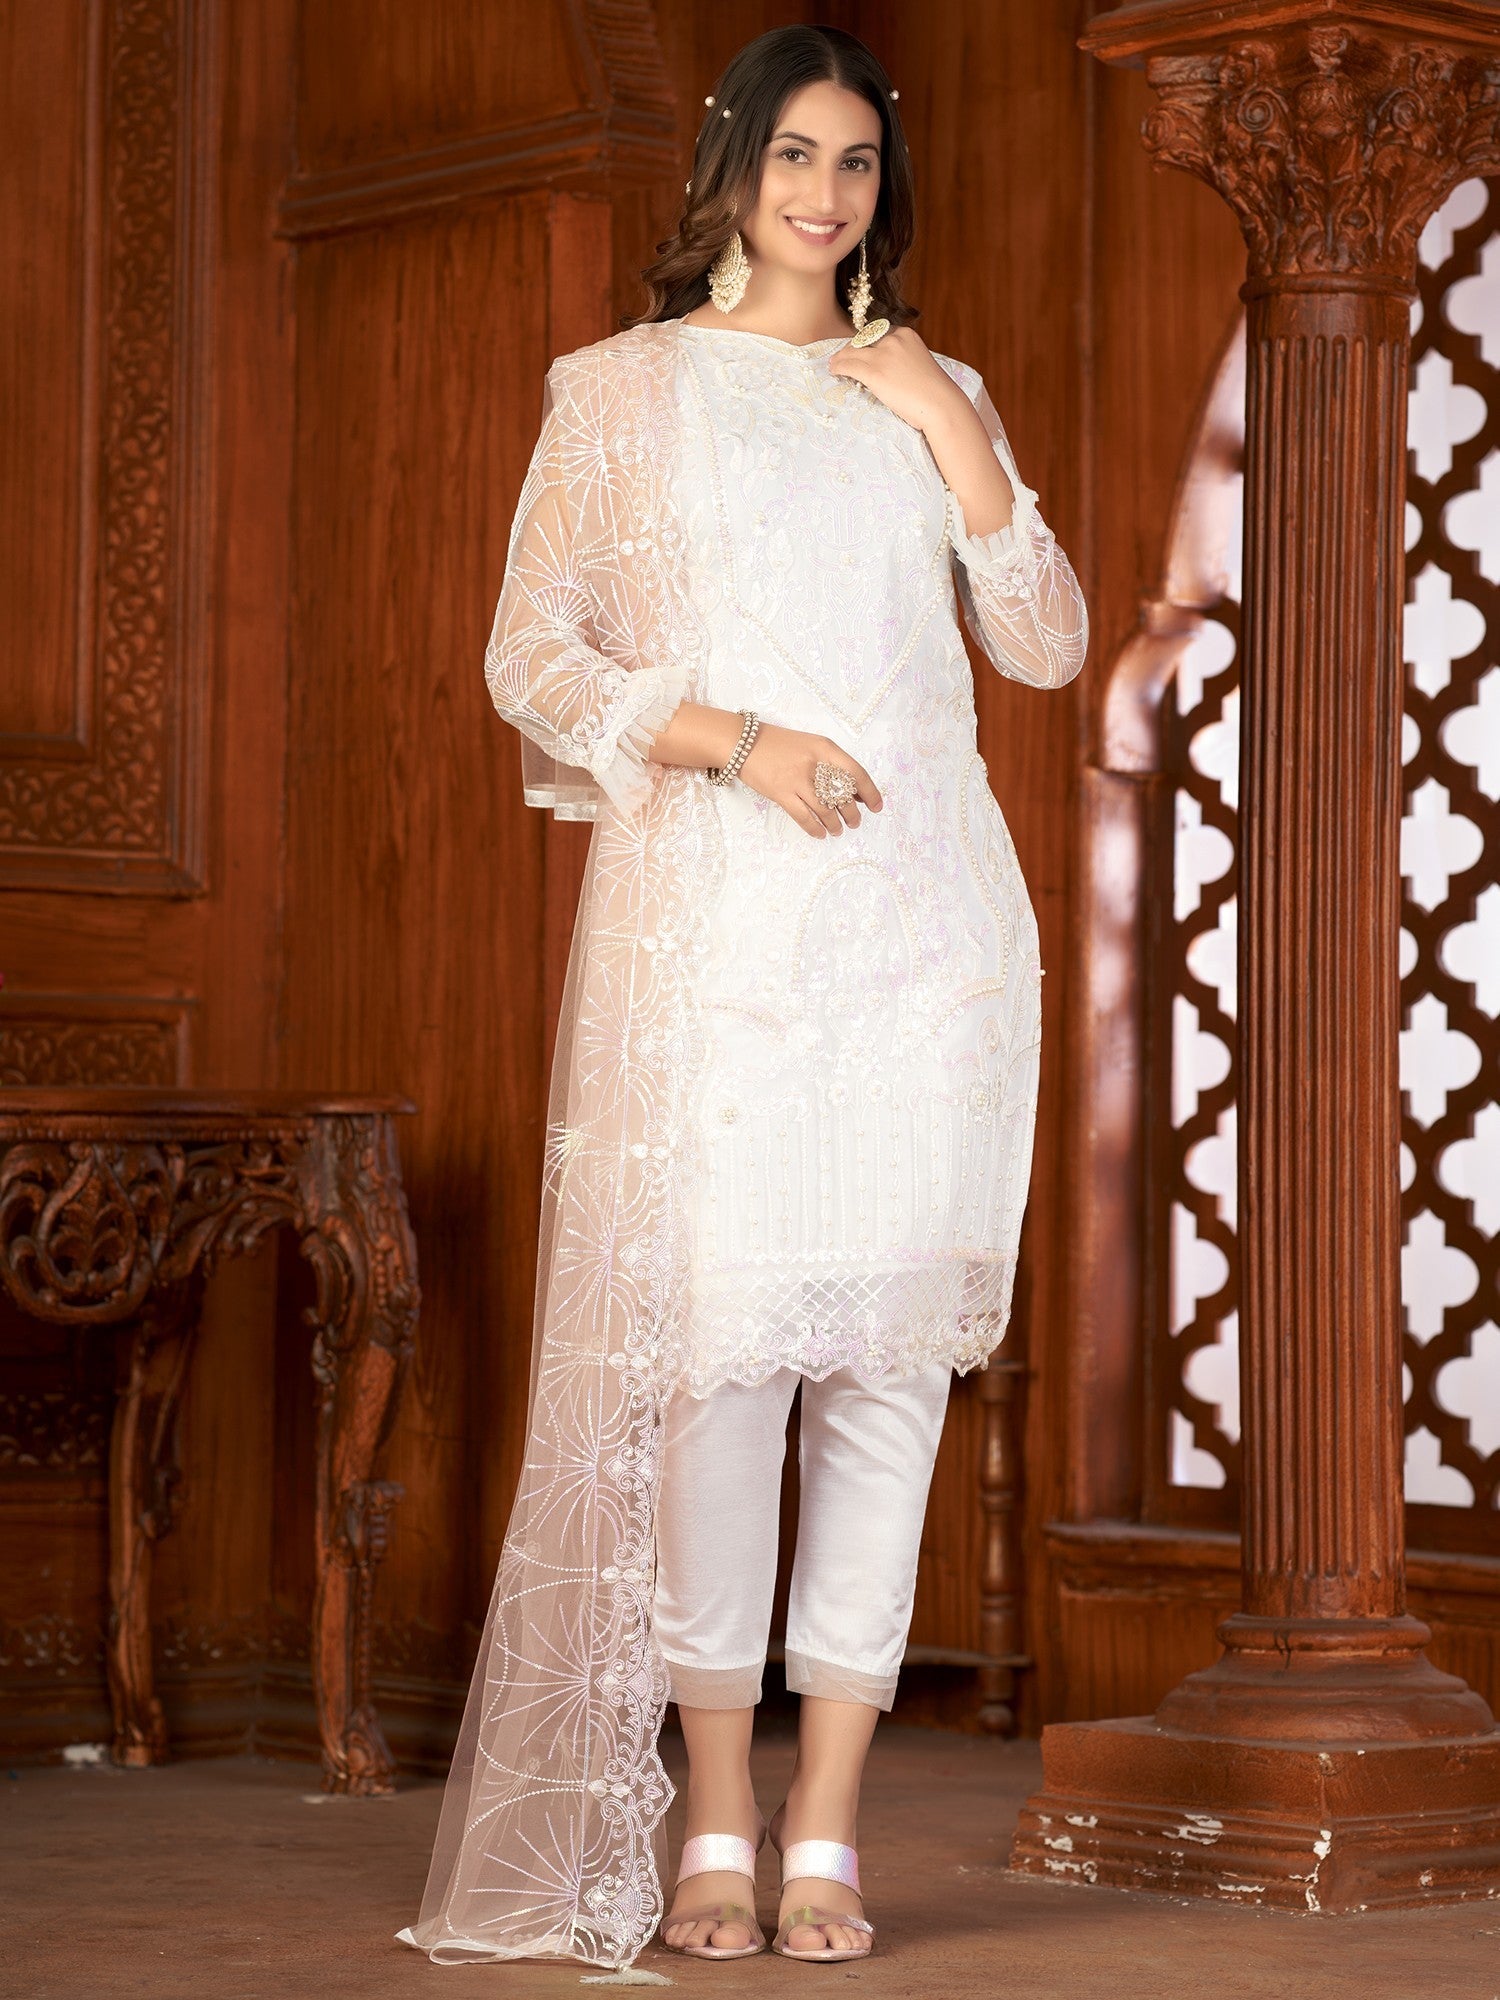 Net Lawn Style Salwar Suit With Thread-Sequins Floral Embroidery And Scalloped Pattern Net Dupatta